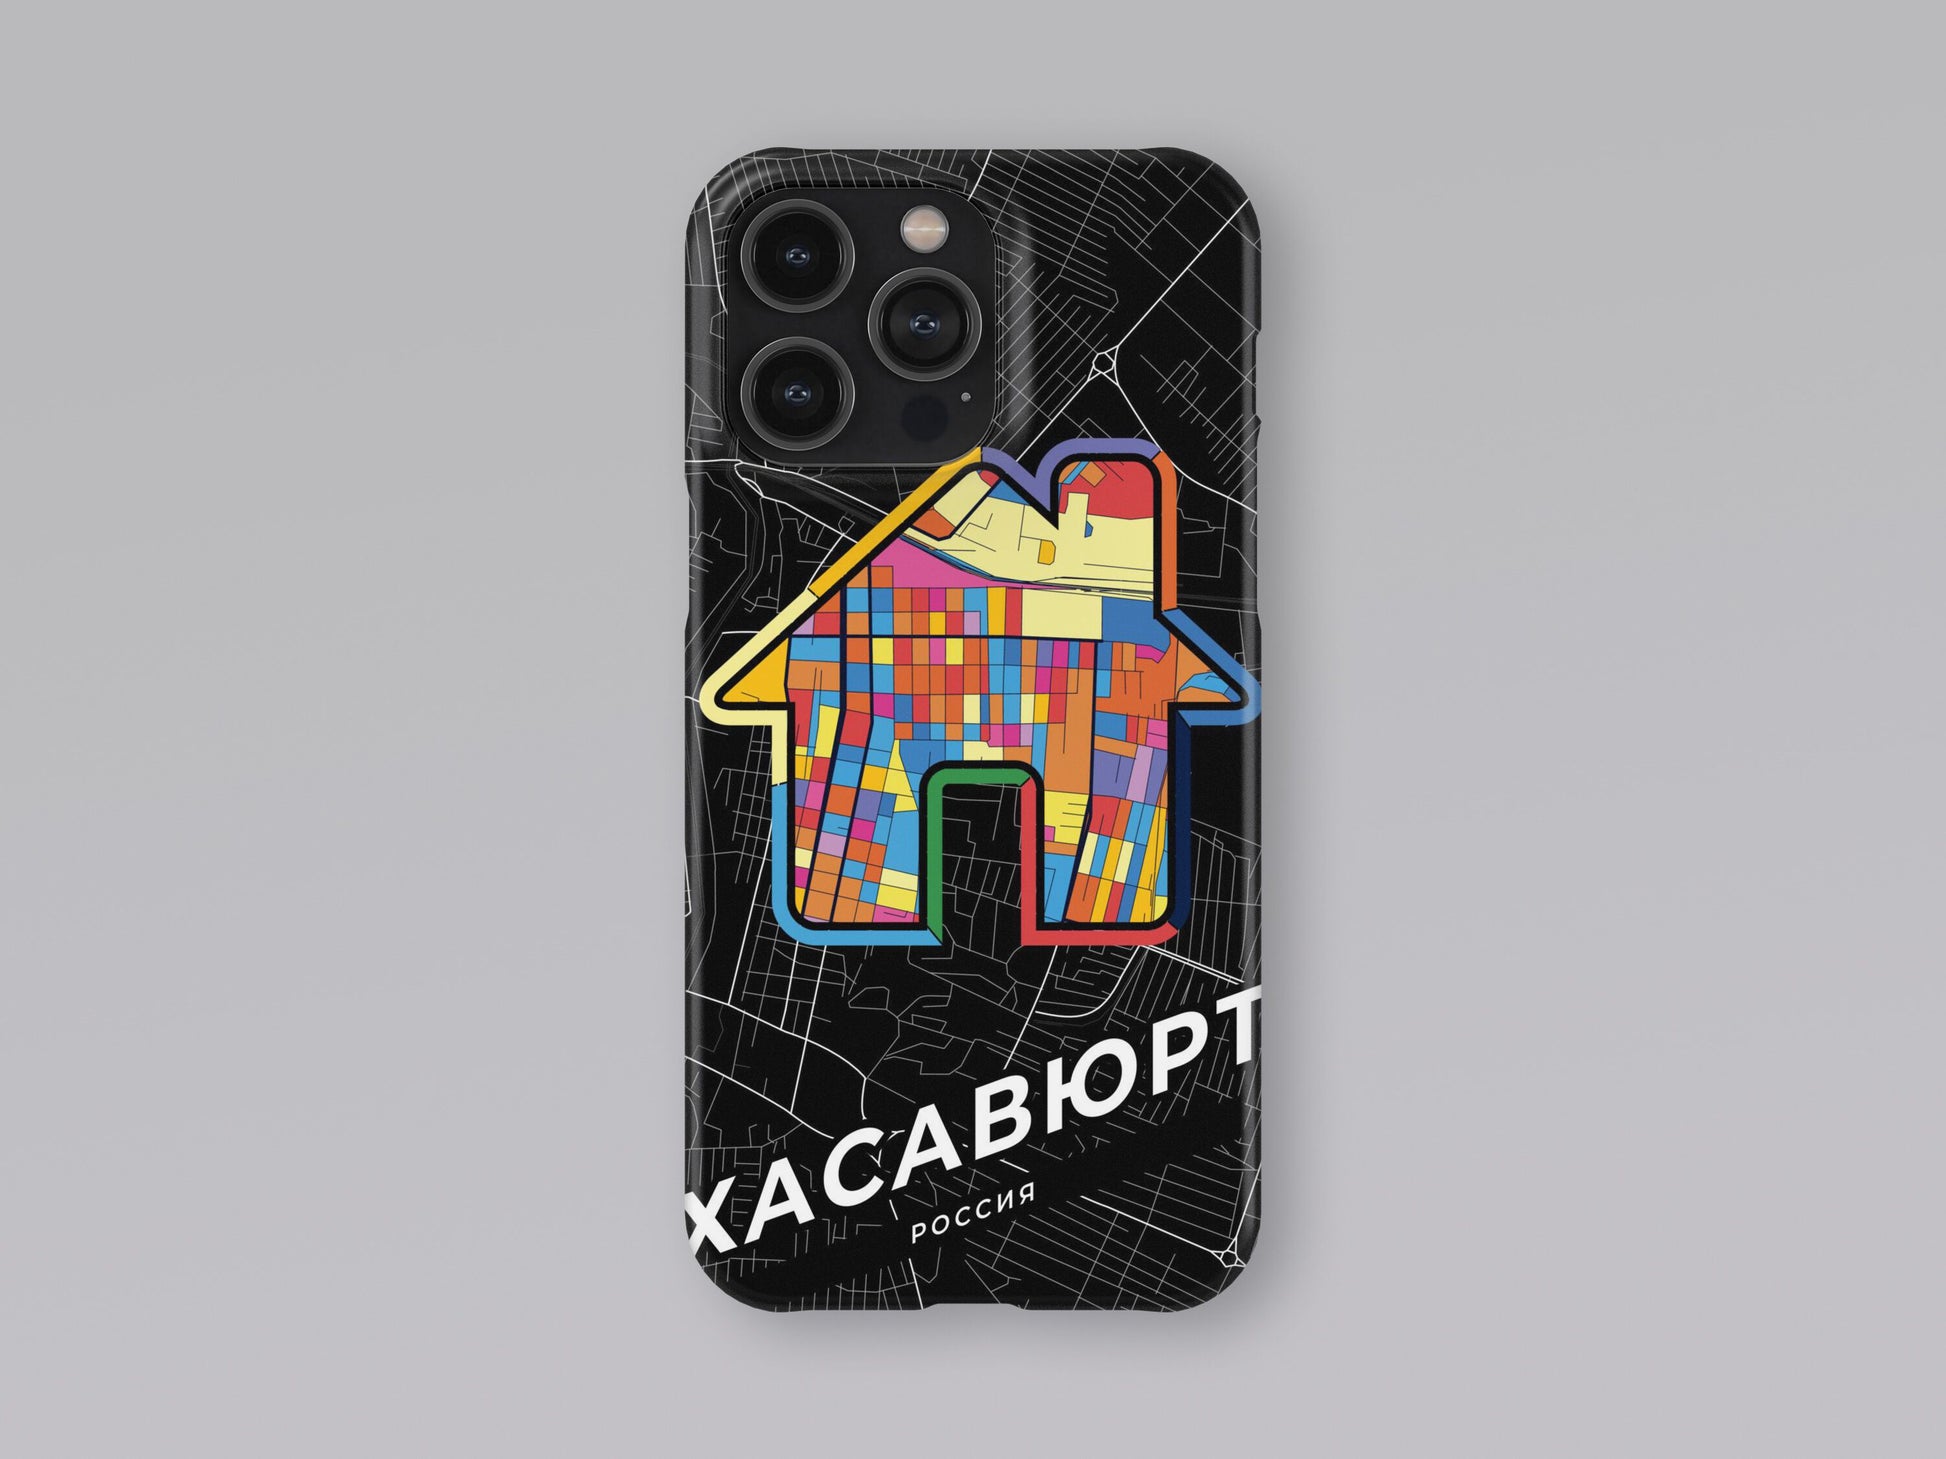 Khasavyurt Russia slim phone case with colorful icon. Birthday, wedding or housewarming gift. Couple match cases. 3